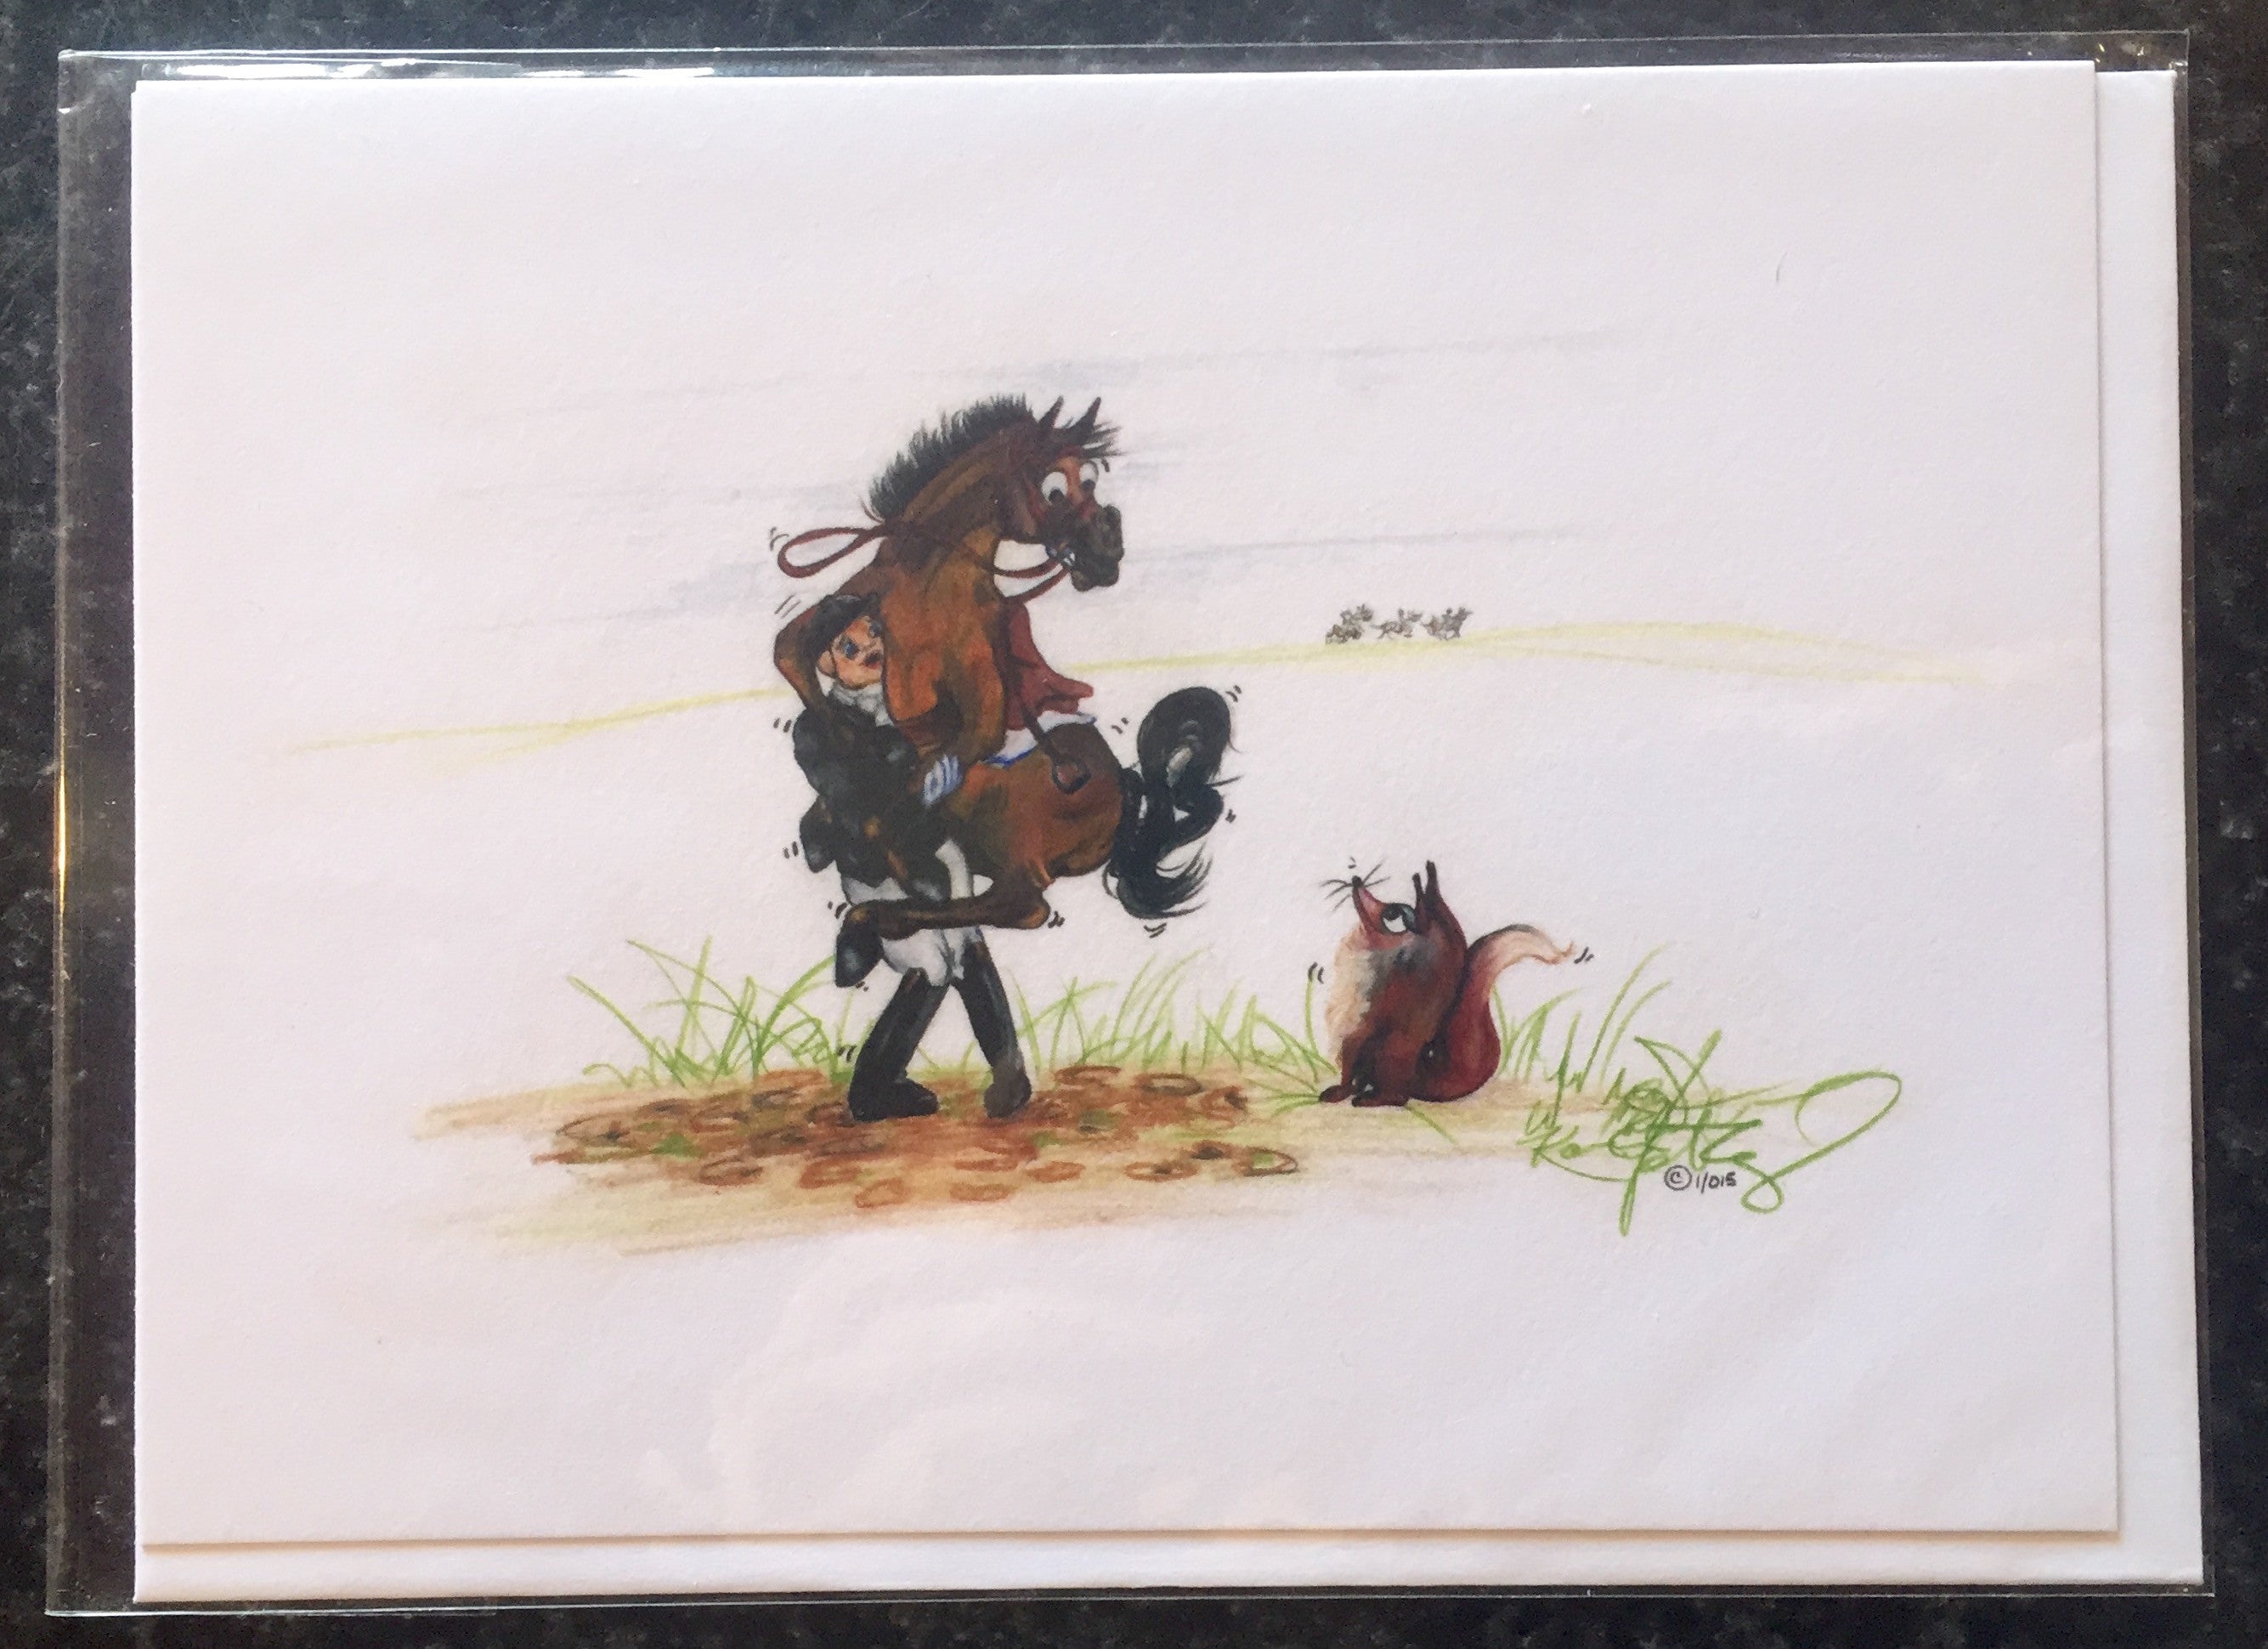 One Painted Pony Illustrations Gift Card "Top Of The Morning to You" - Horse & Hound Tack Shop & Pet Supply